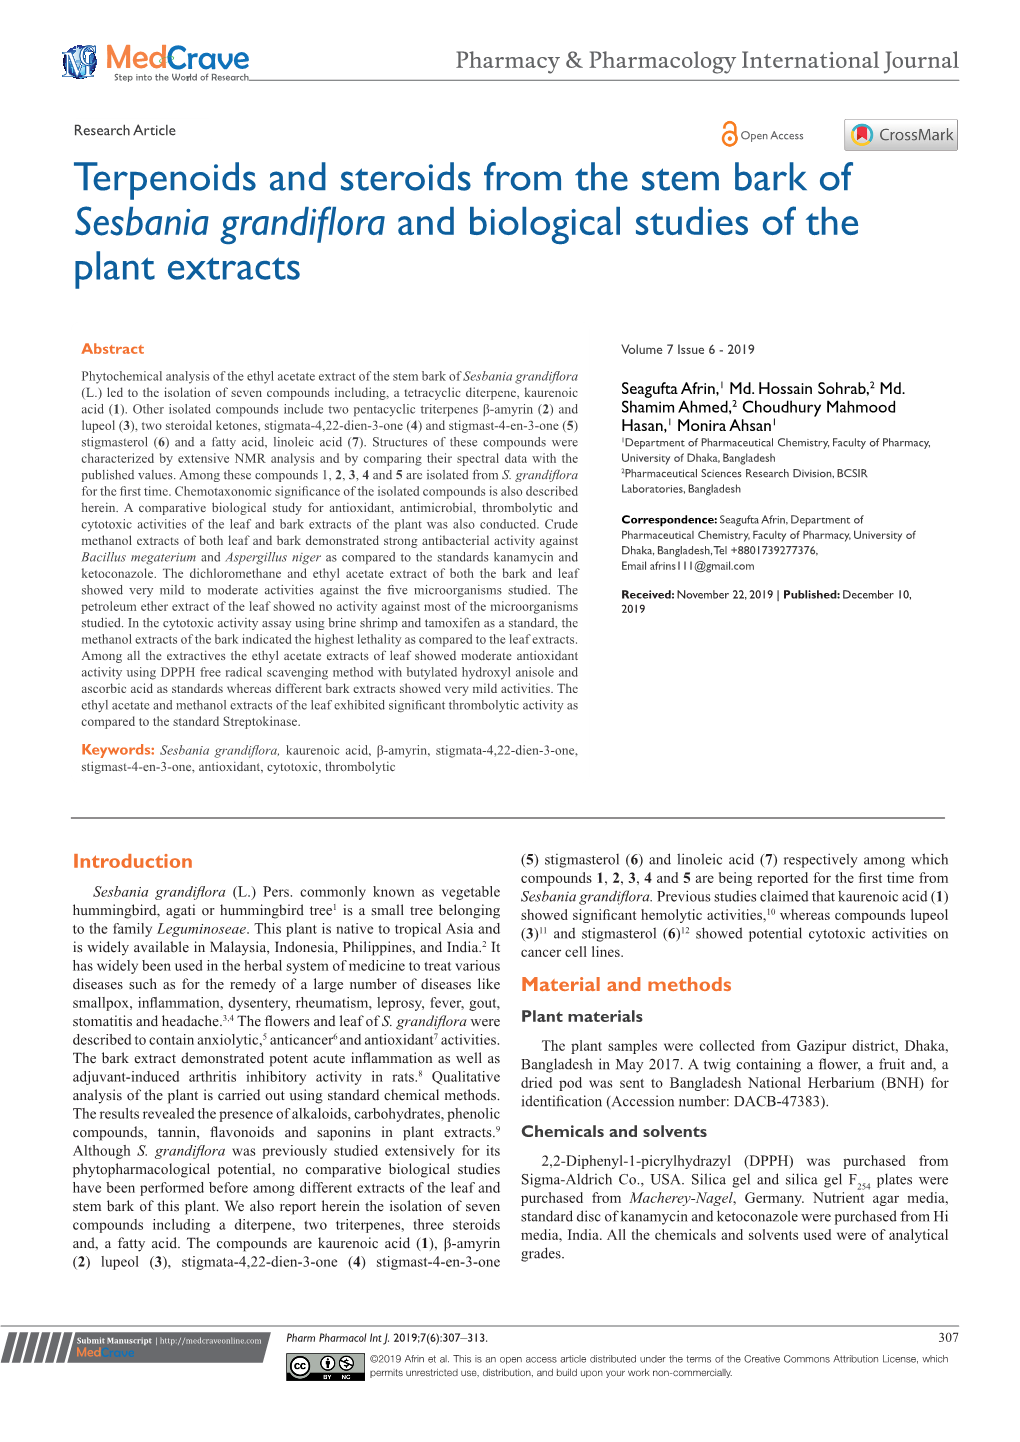 Sesbania Grandiflora and Biological Studies of the Plant Extracts